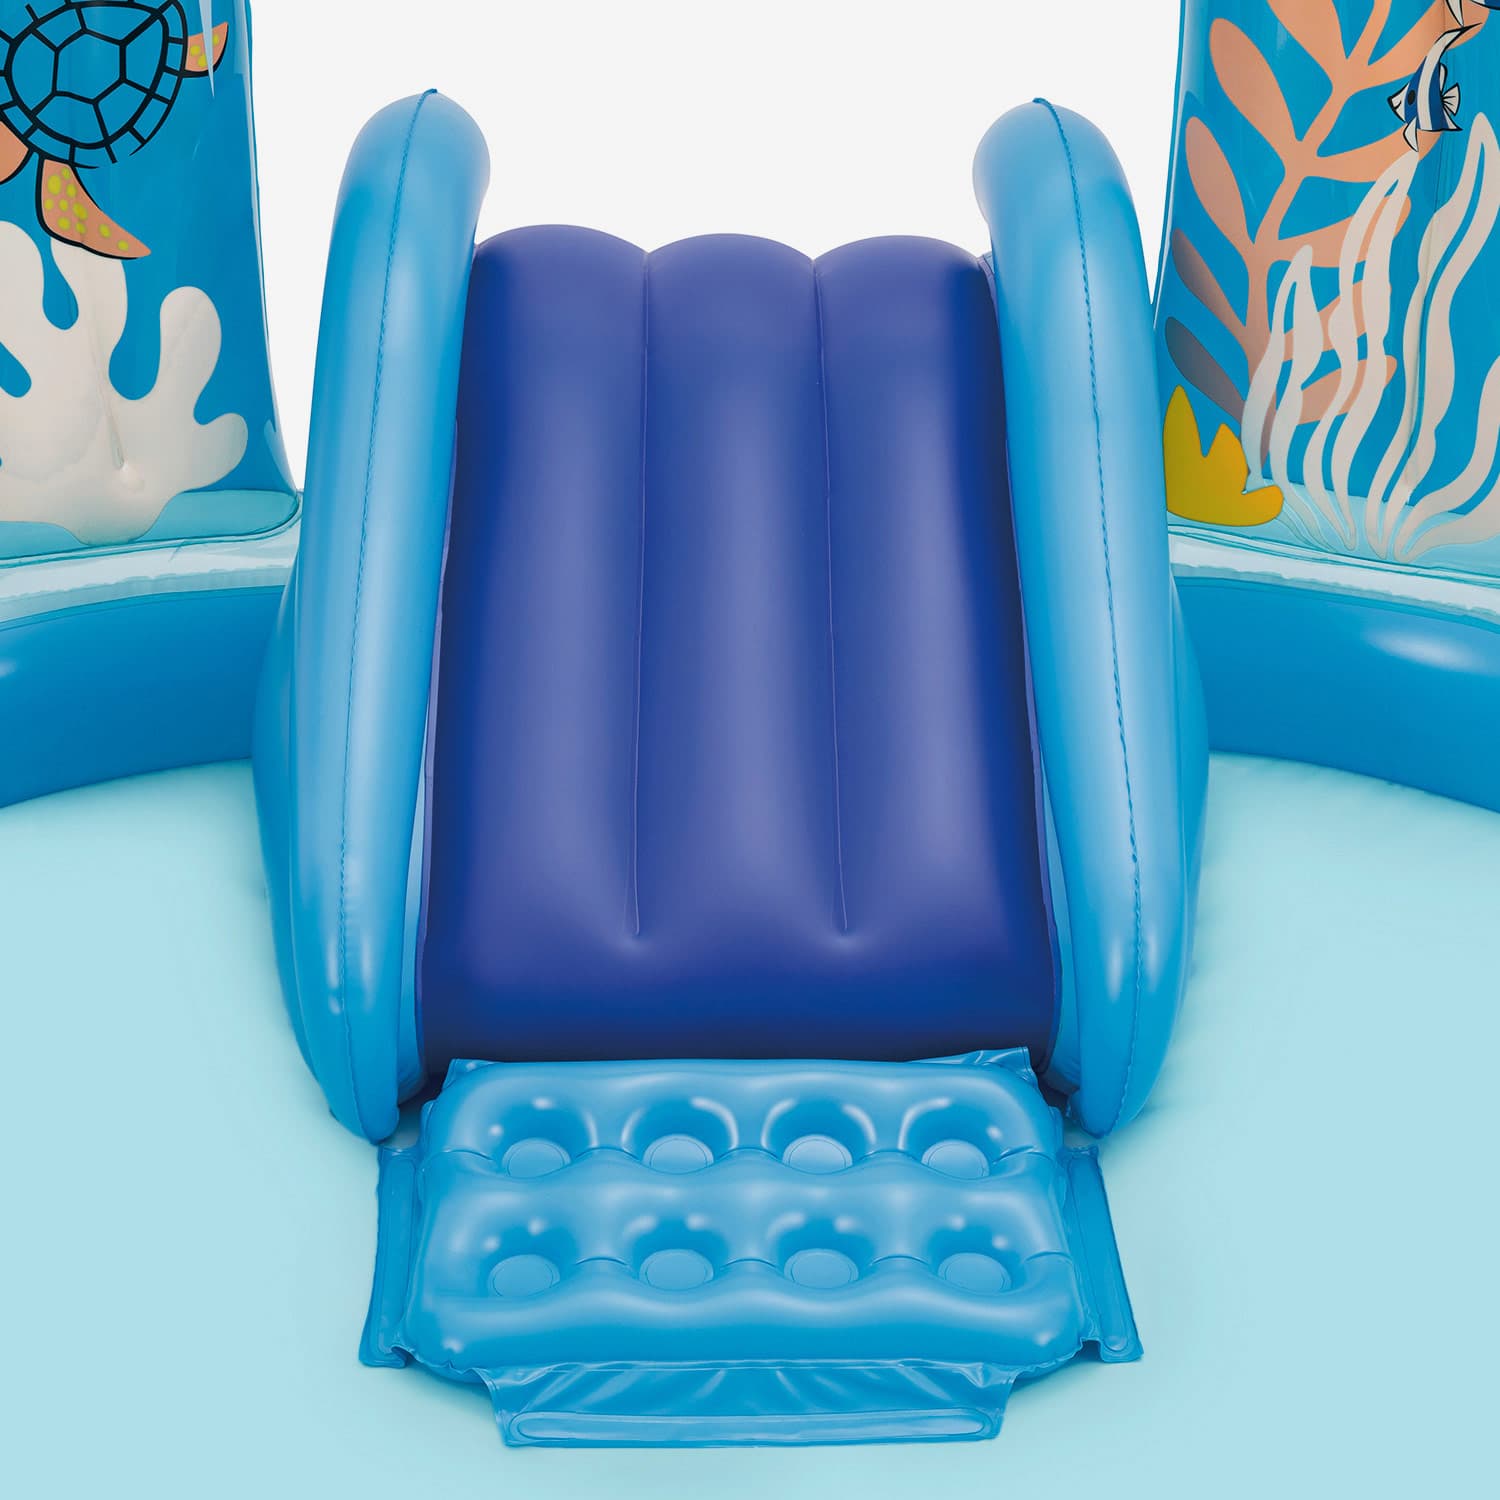 Funsicle Whale Kingdom Playcenter close up view